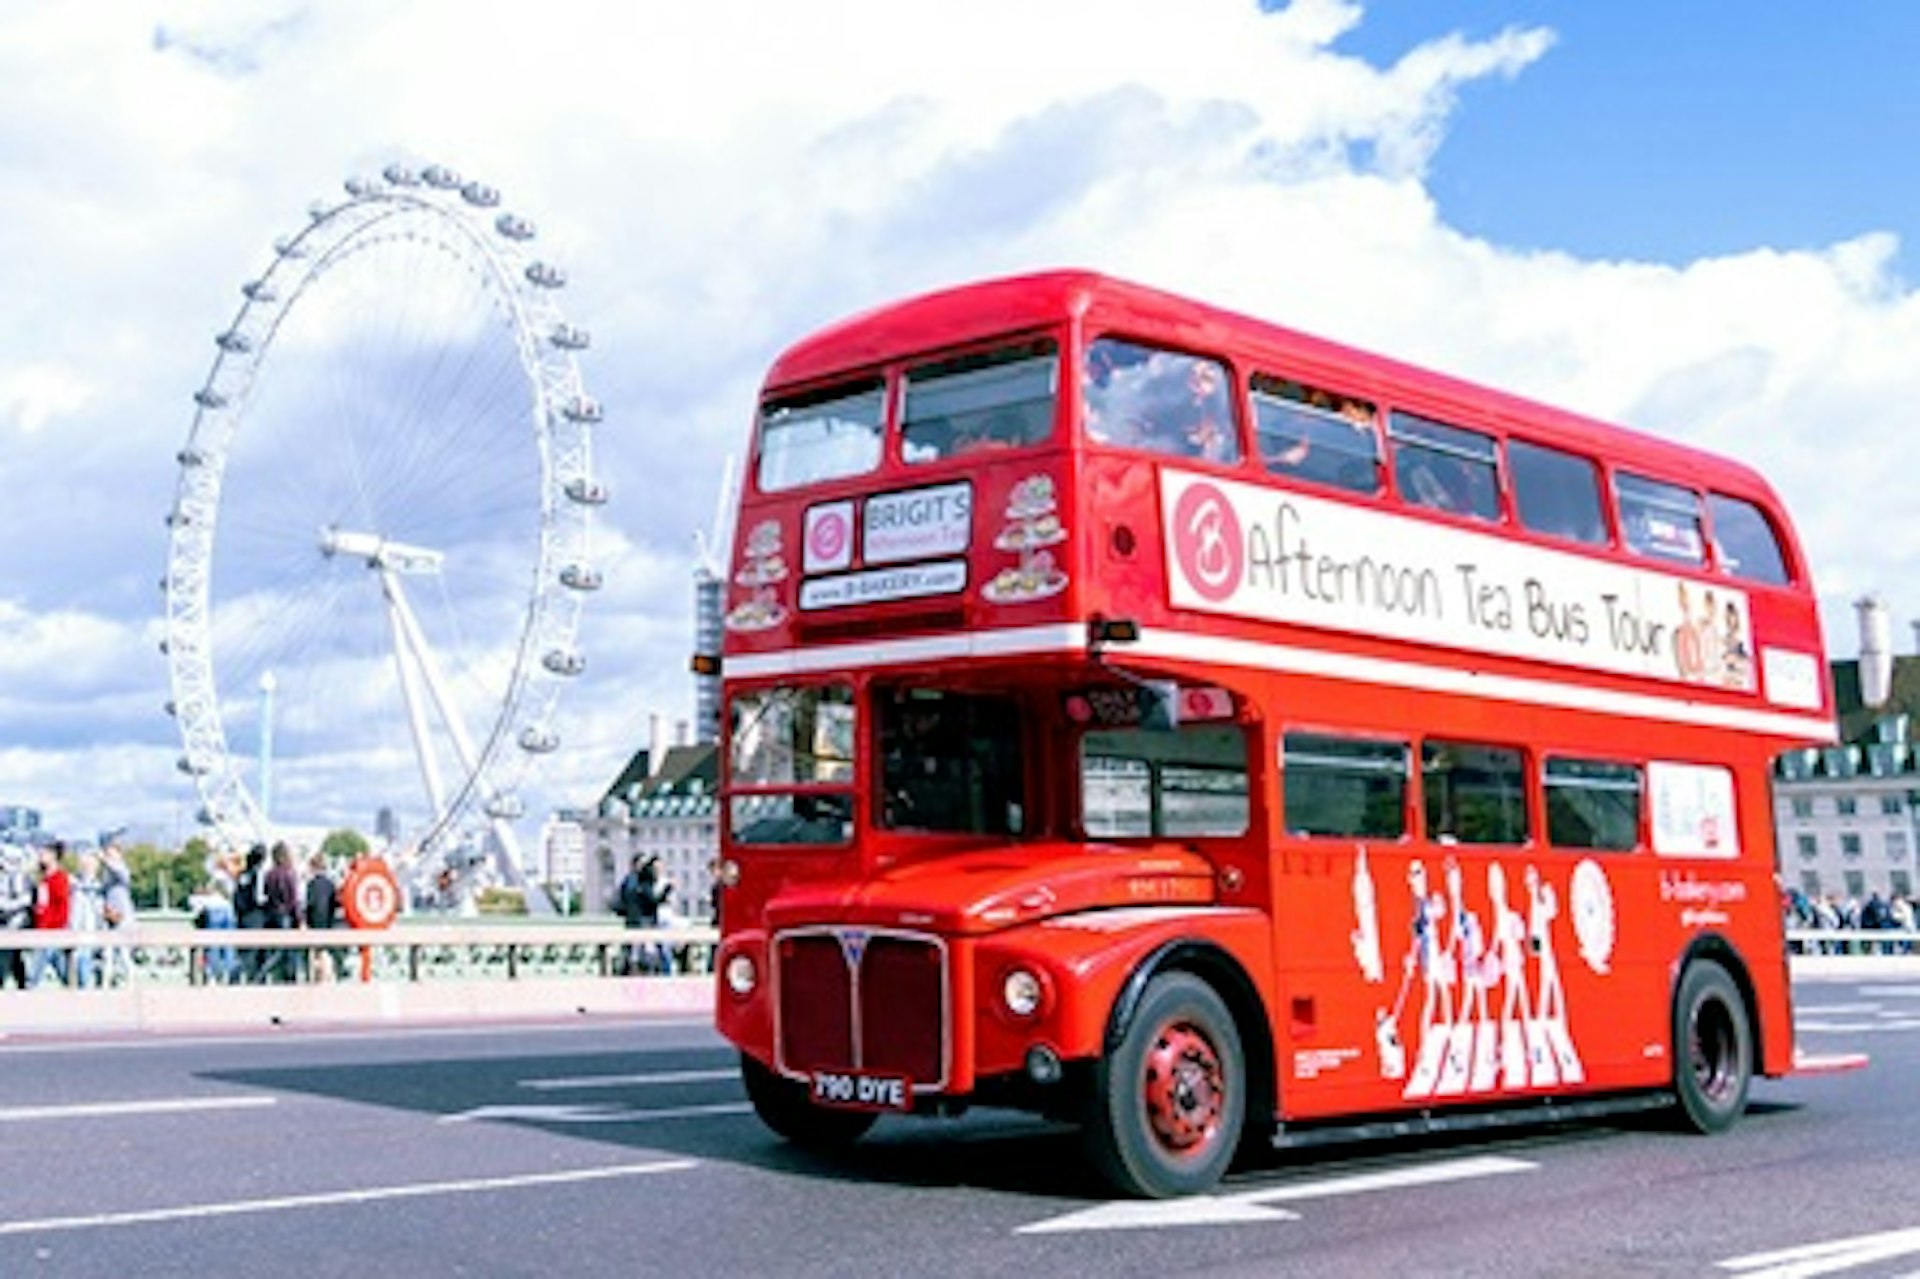 Vintage Afternoon Tea Bus in London for Two with B Bakery